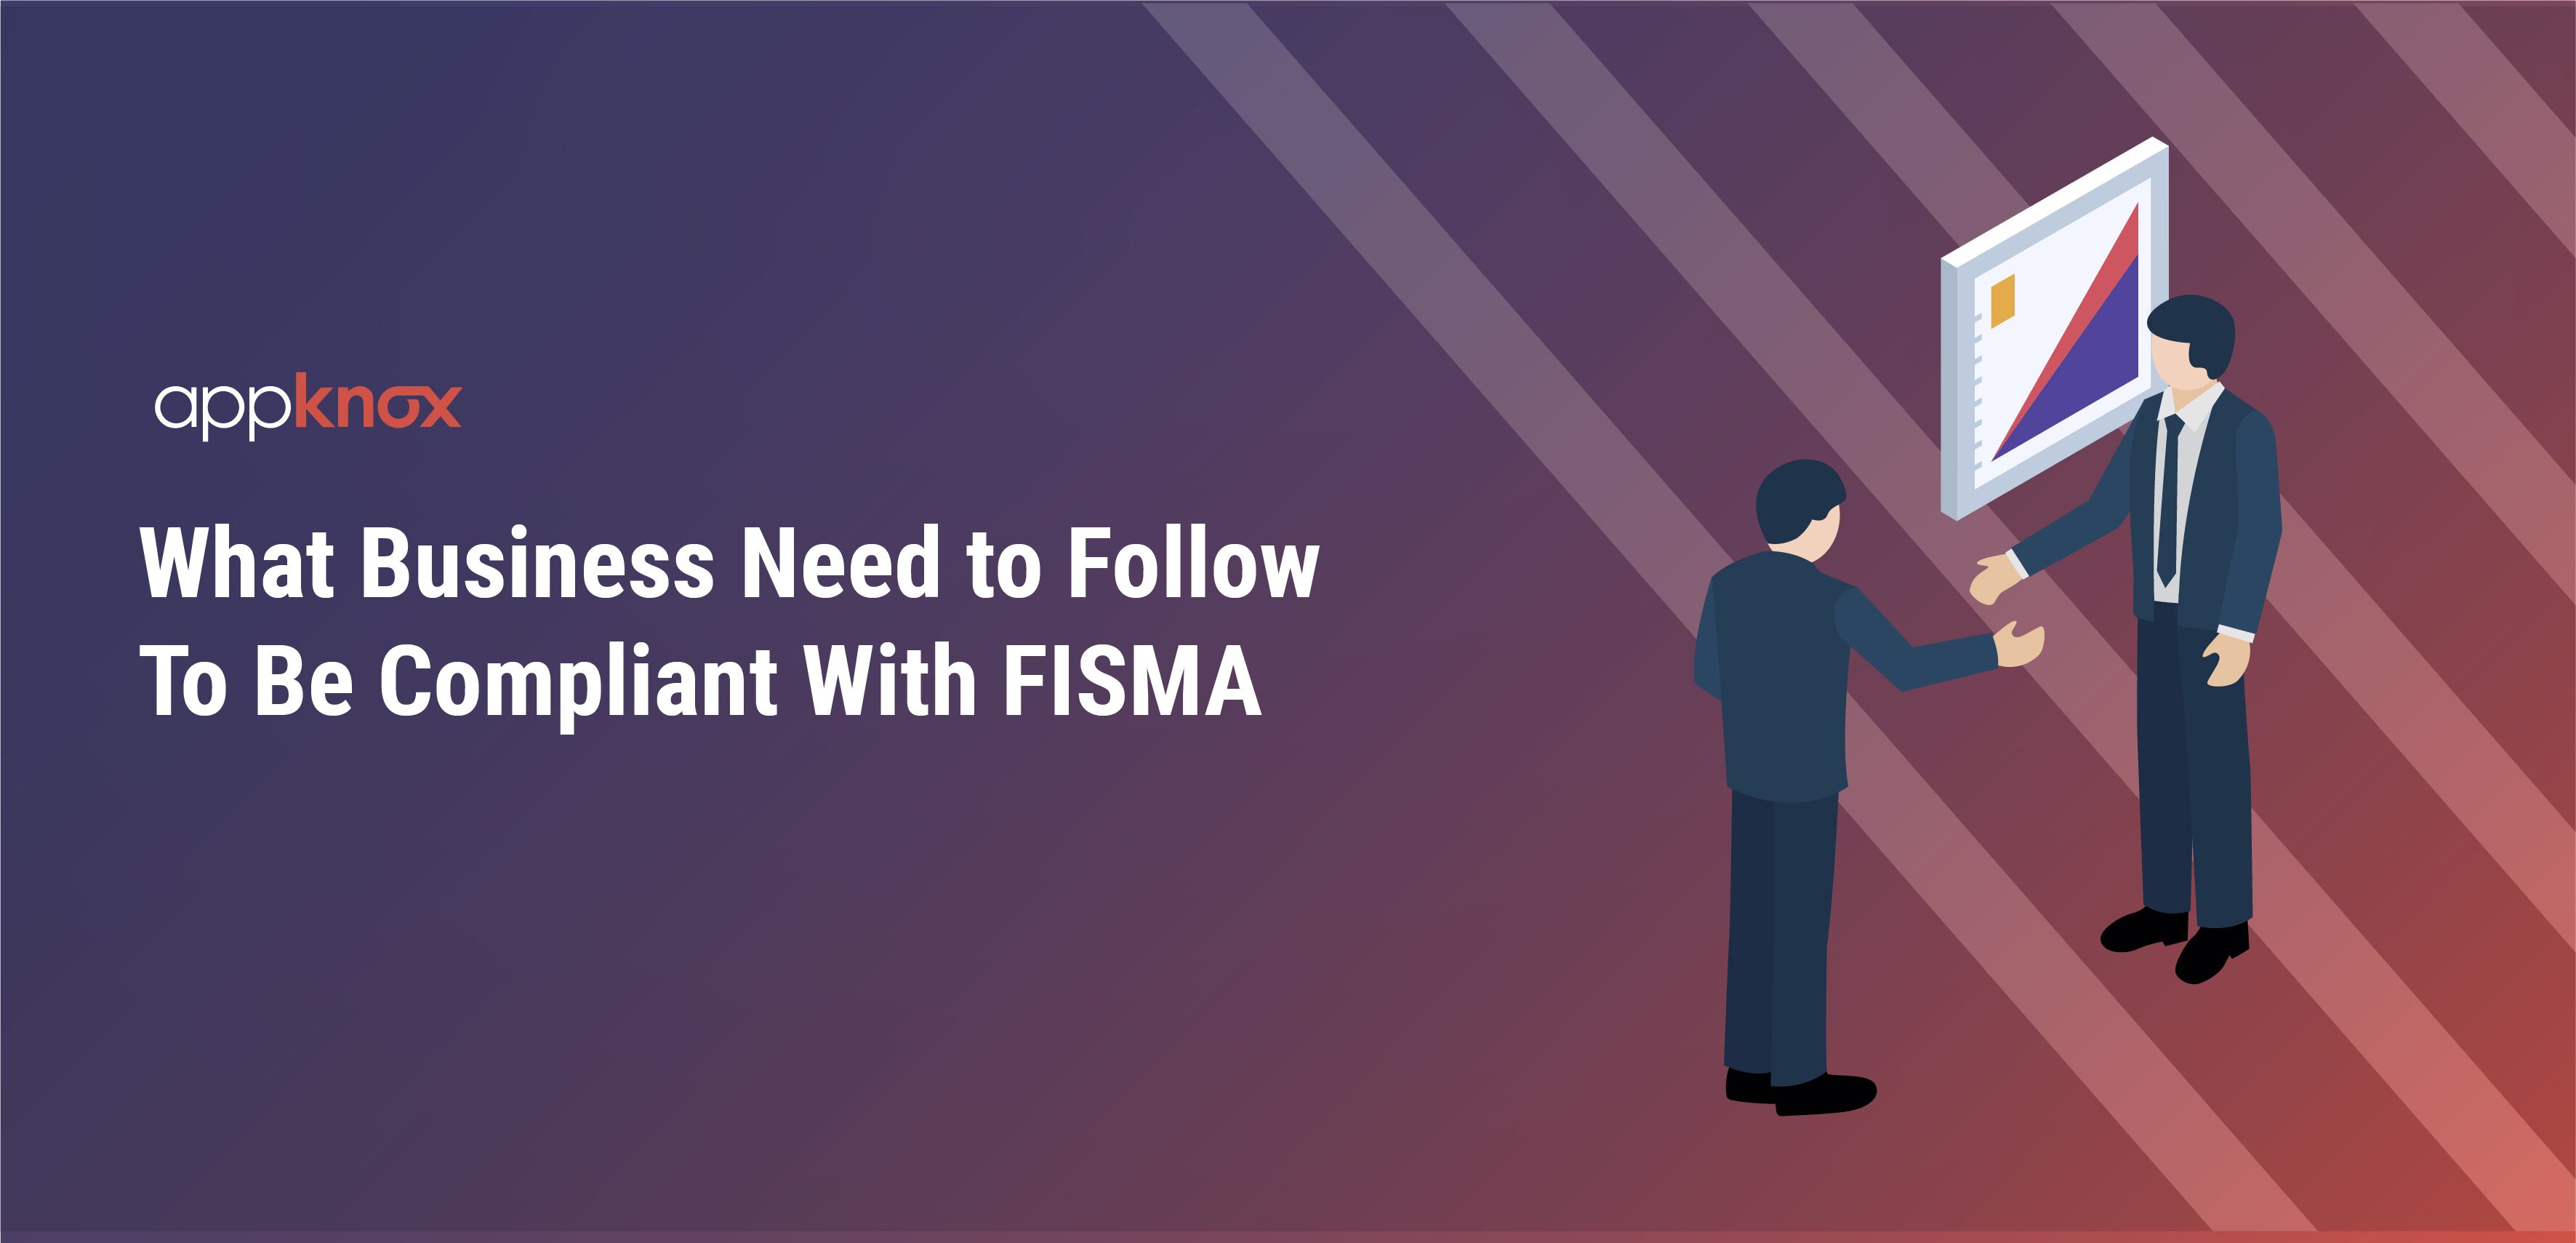 What Businesses Need To Follow To Be Compliant With FISMA